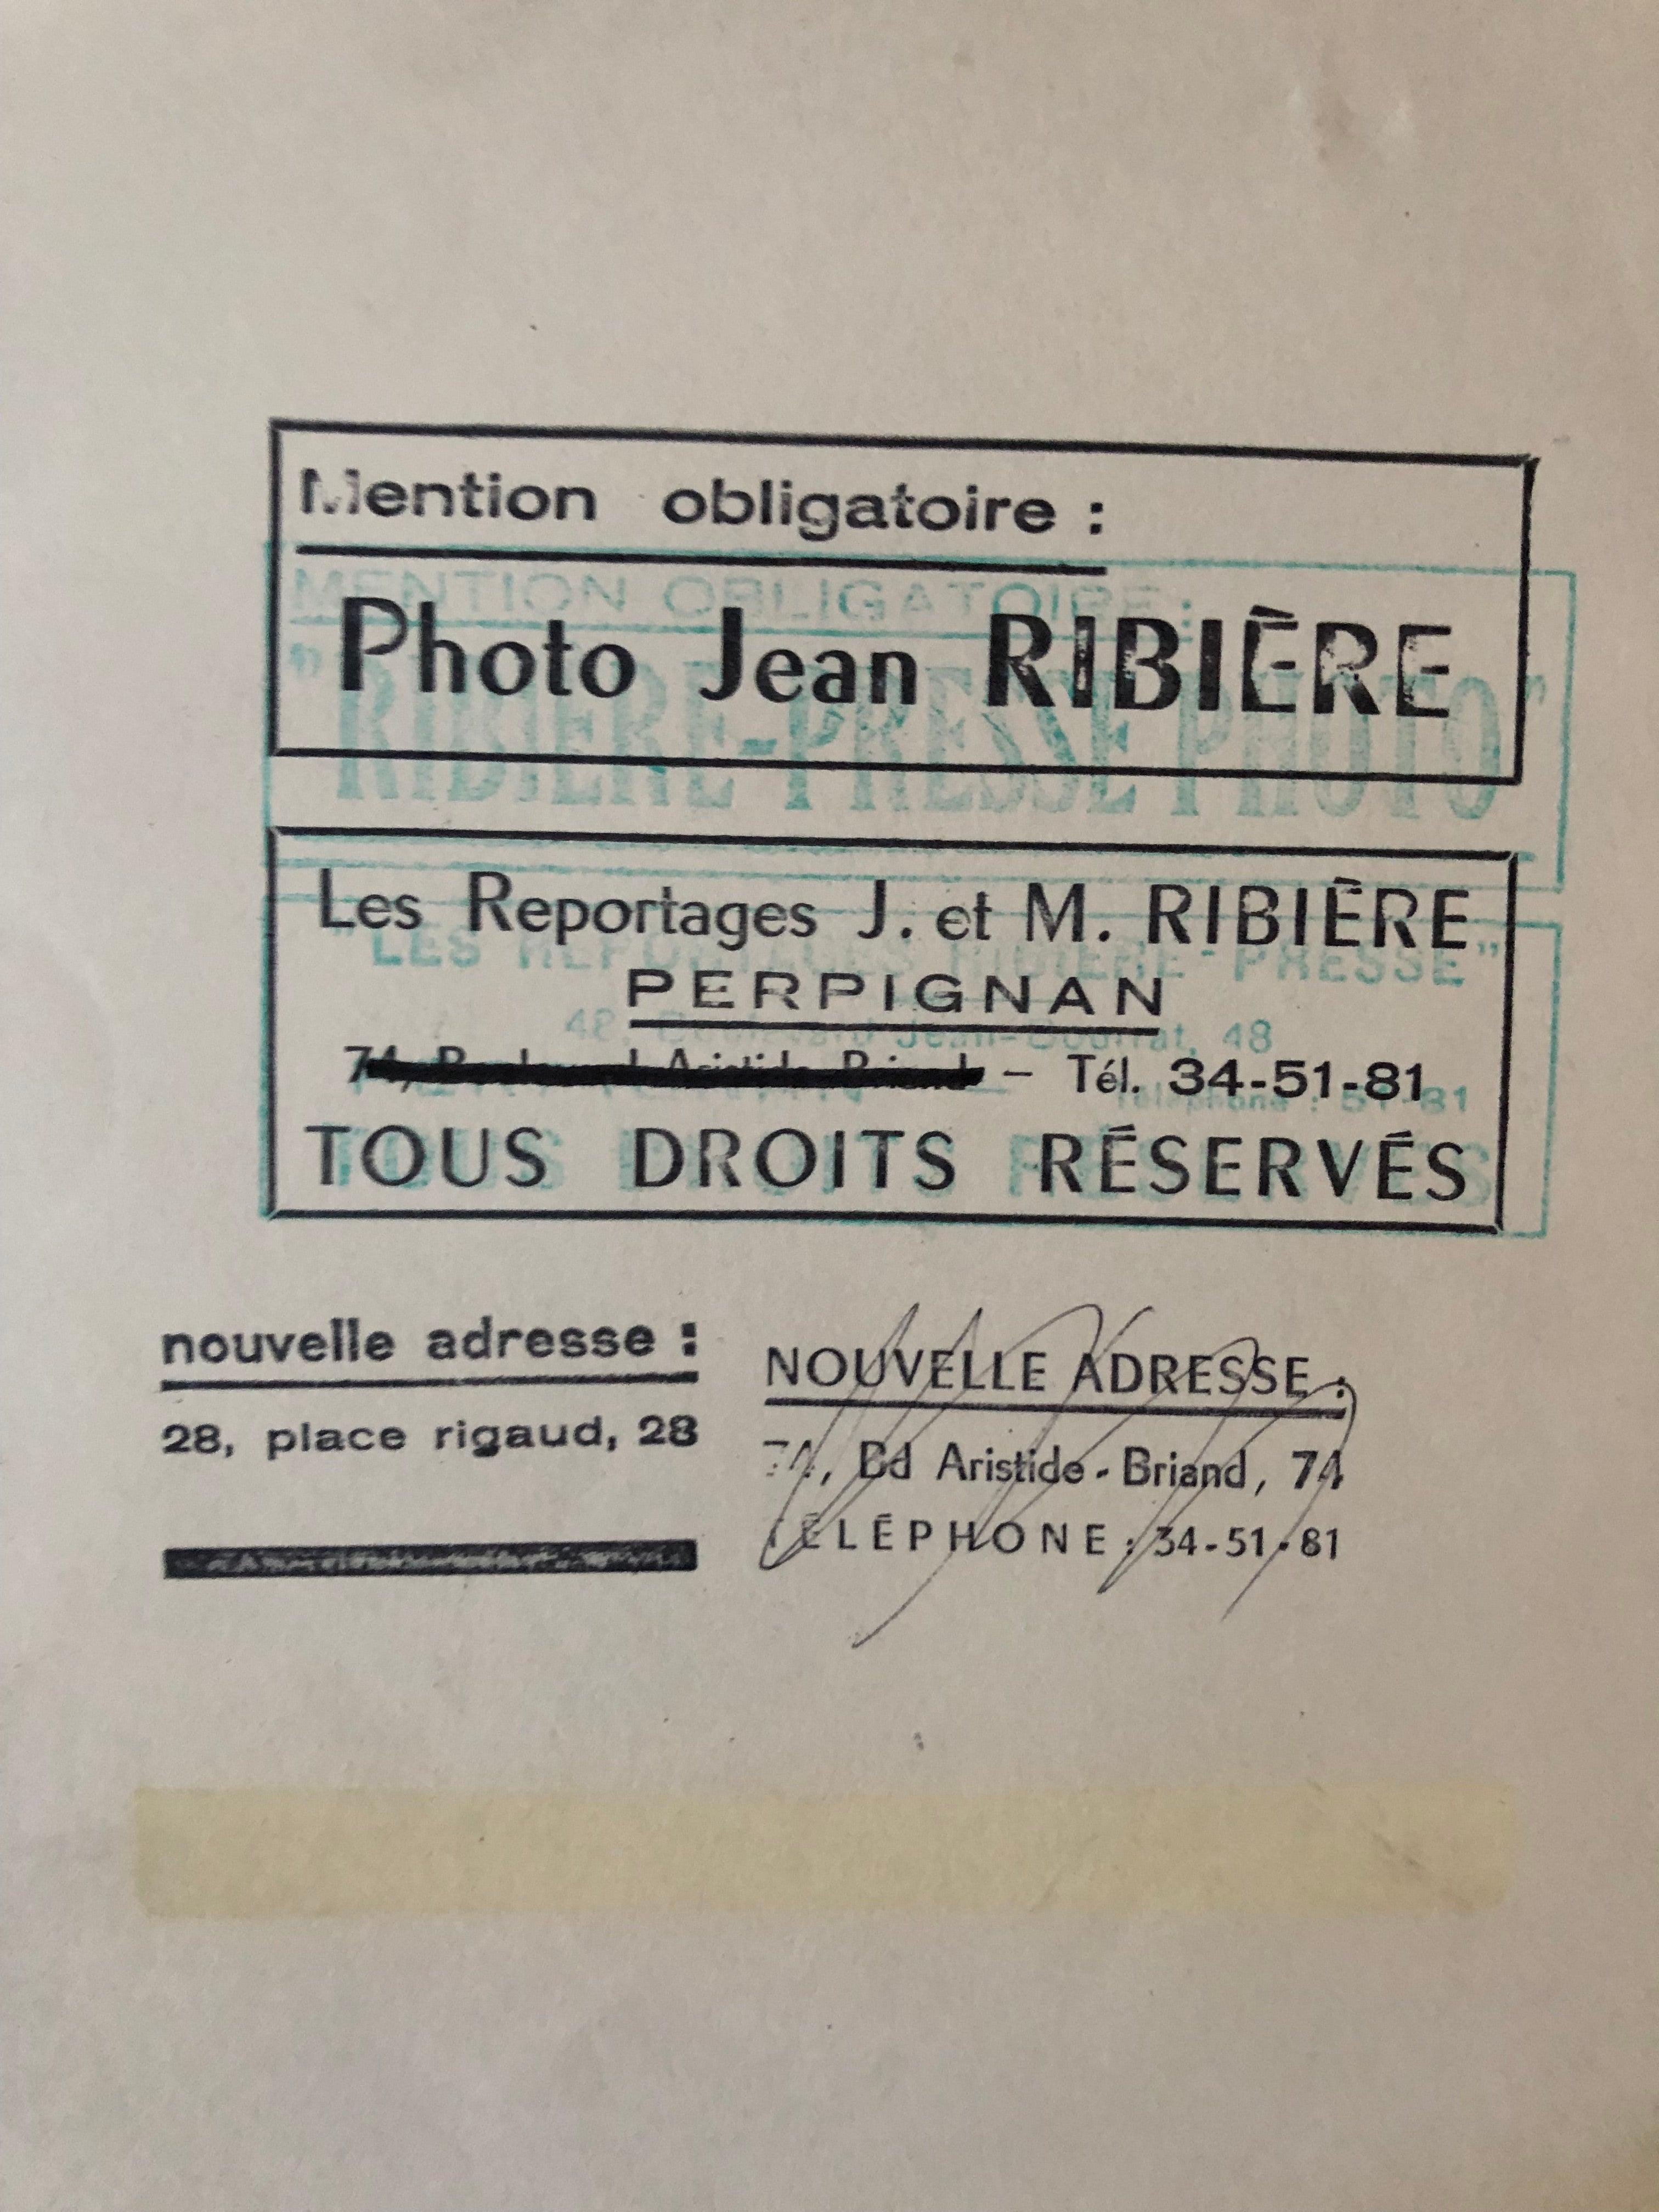 Jean Ribière, renowned photographer, was National Vice President of the A.N.J.R.P.C. (National Association of Journalists Reporters Photographers and Filmmakers), whose President was Robert Doisneau and the main members Henri Cartier-Bresson and